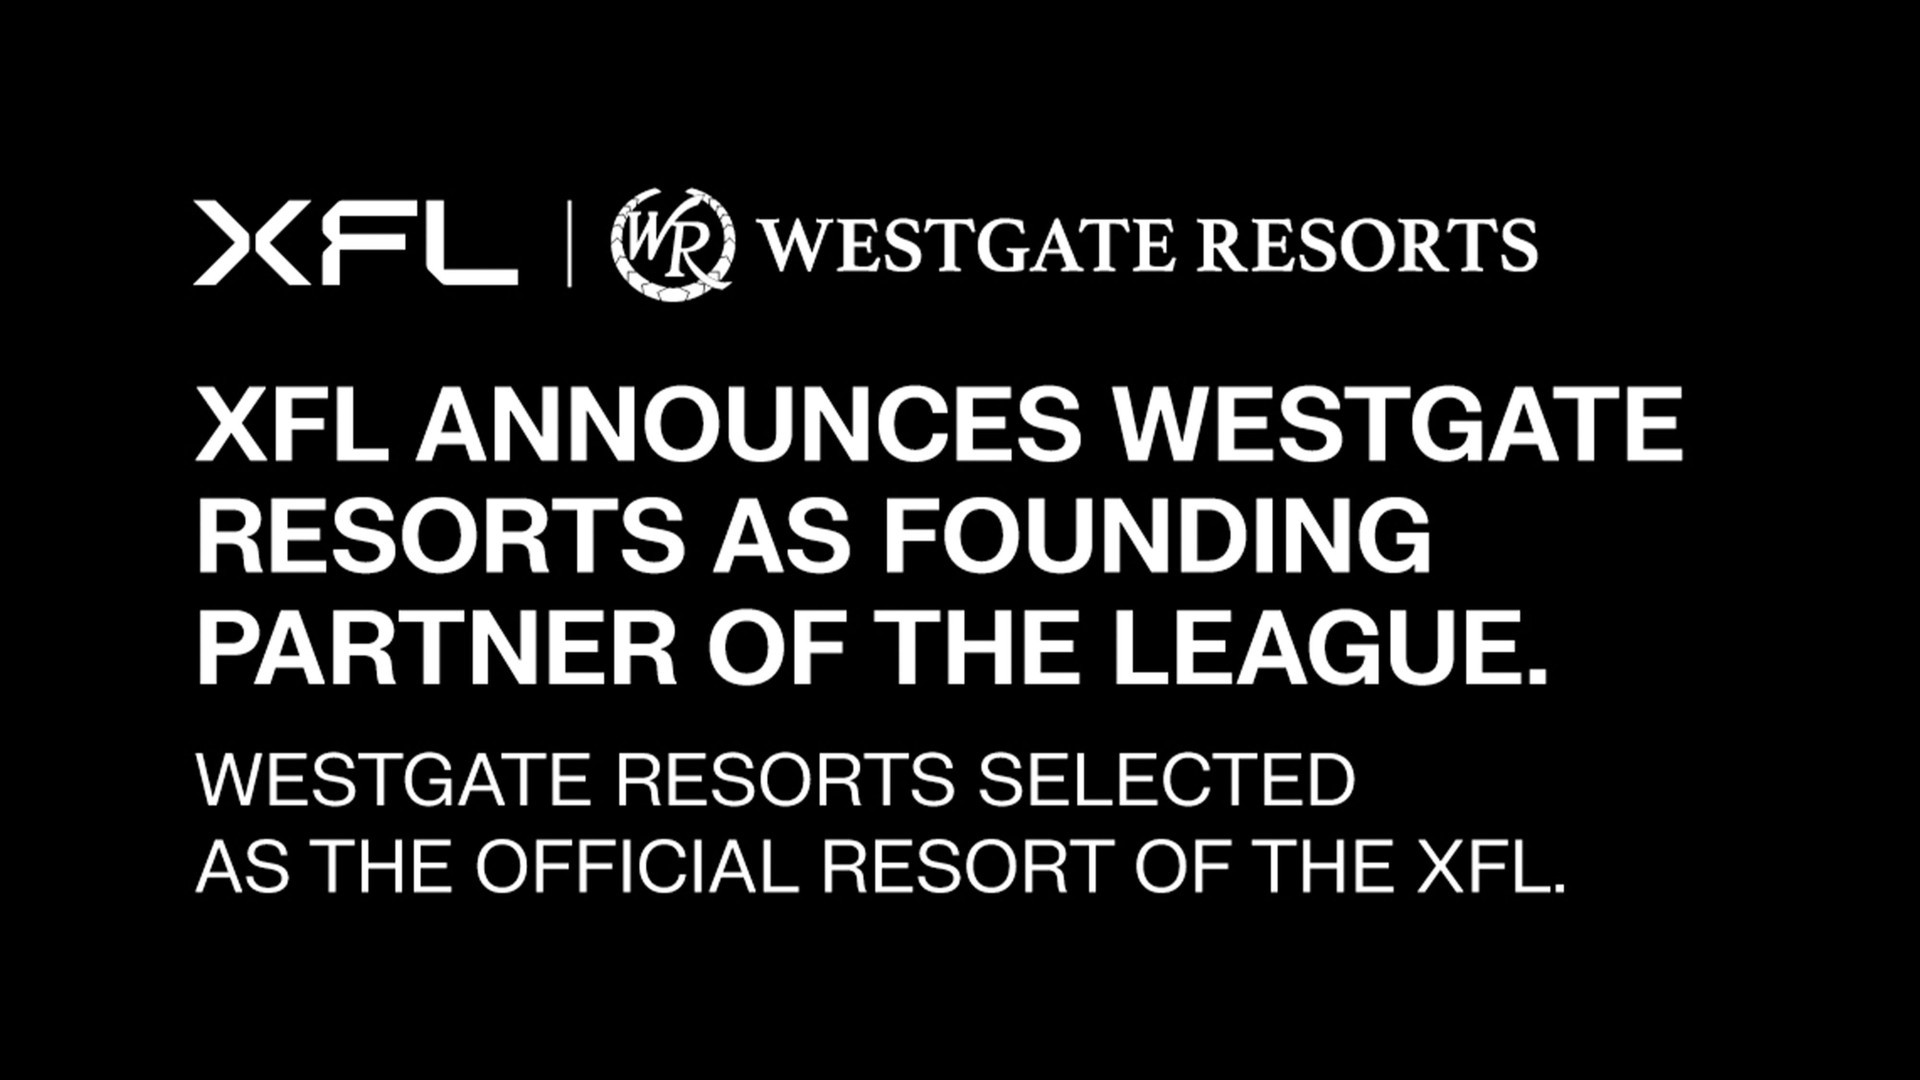 XFL Announces Westgate Resorts as Founding Partner of the League Westgate Resorts Selected as the Official Resort of the XFL